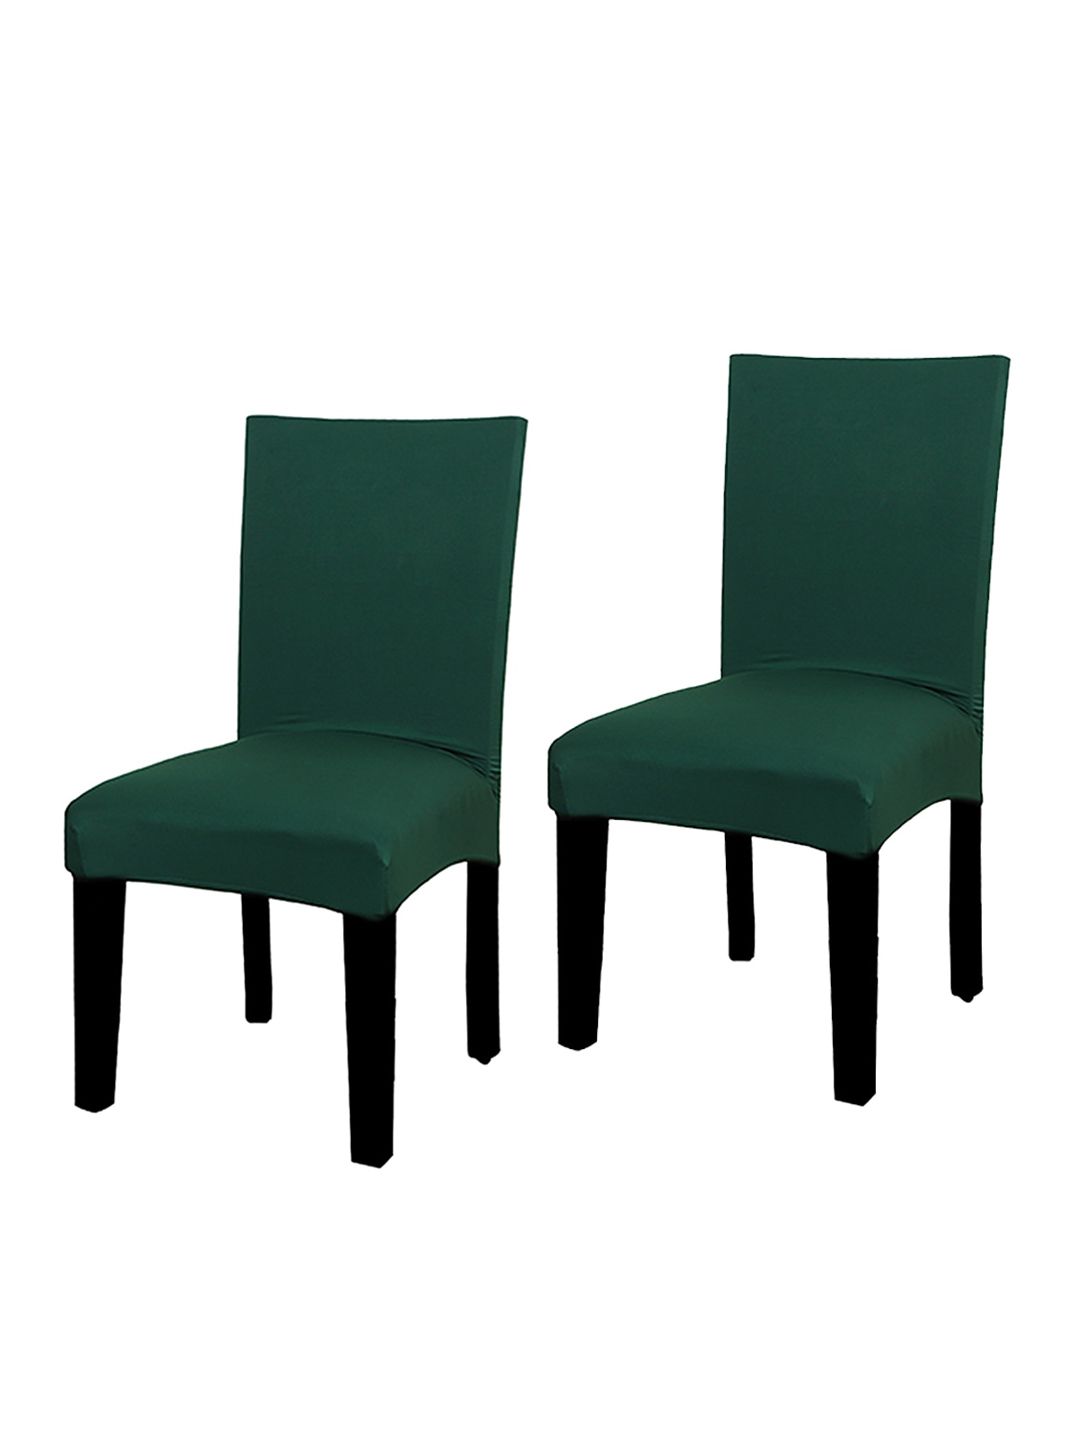 HOUSE OF QUIRK Set of 2 Dark Green Solid Chair Covers Price in India